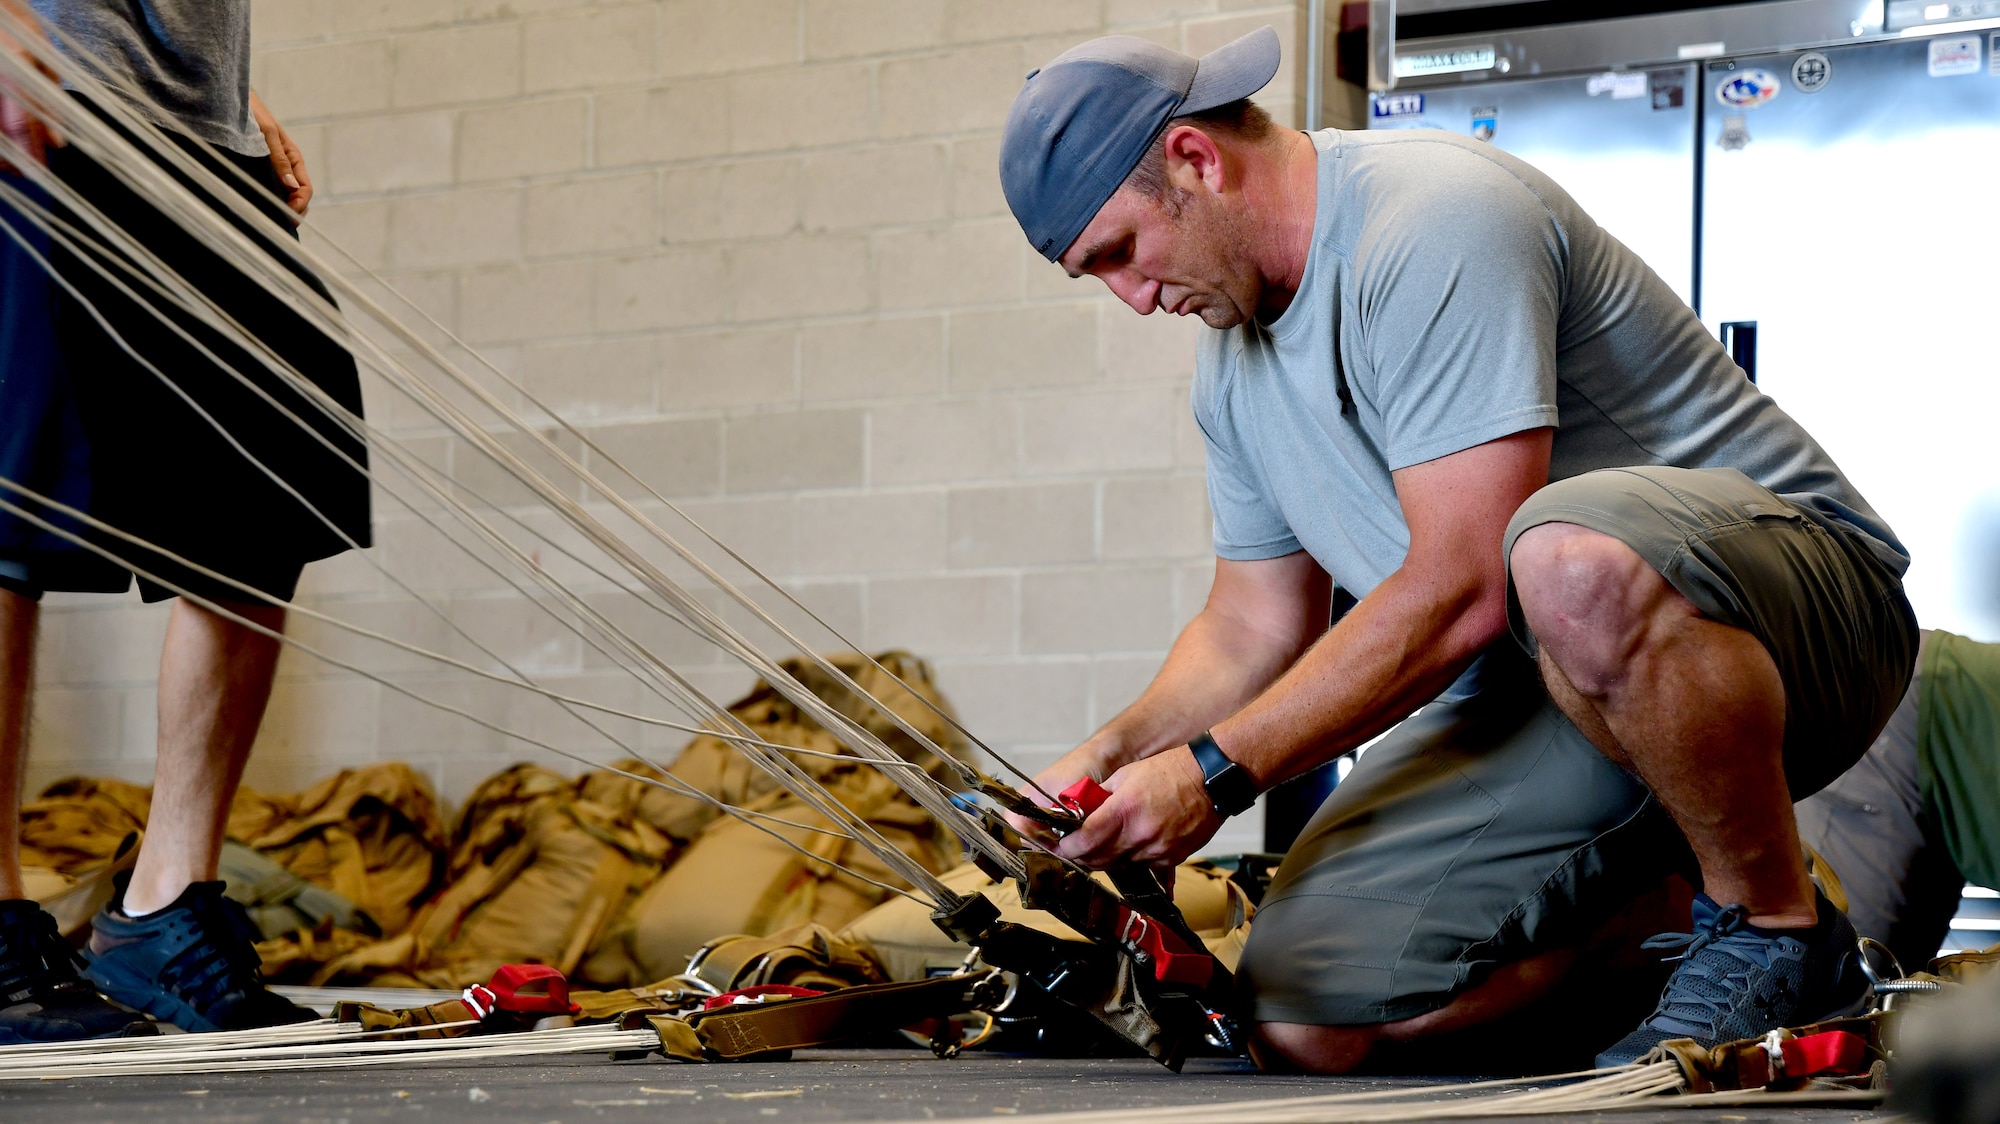 A U.S. Air Force parachute rigger from the 306th Rescue Squadron inspects a parachute prior to packing it for pararescuemen who are accomplishing five-level upgrade jump training at the Marana Regional Airport, Ariz., June 26, 2019.